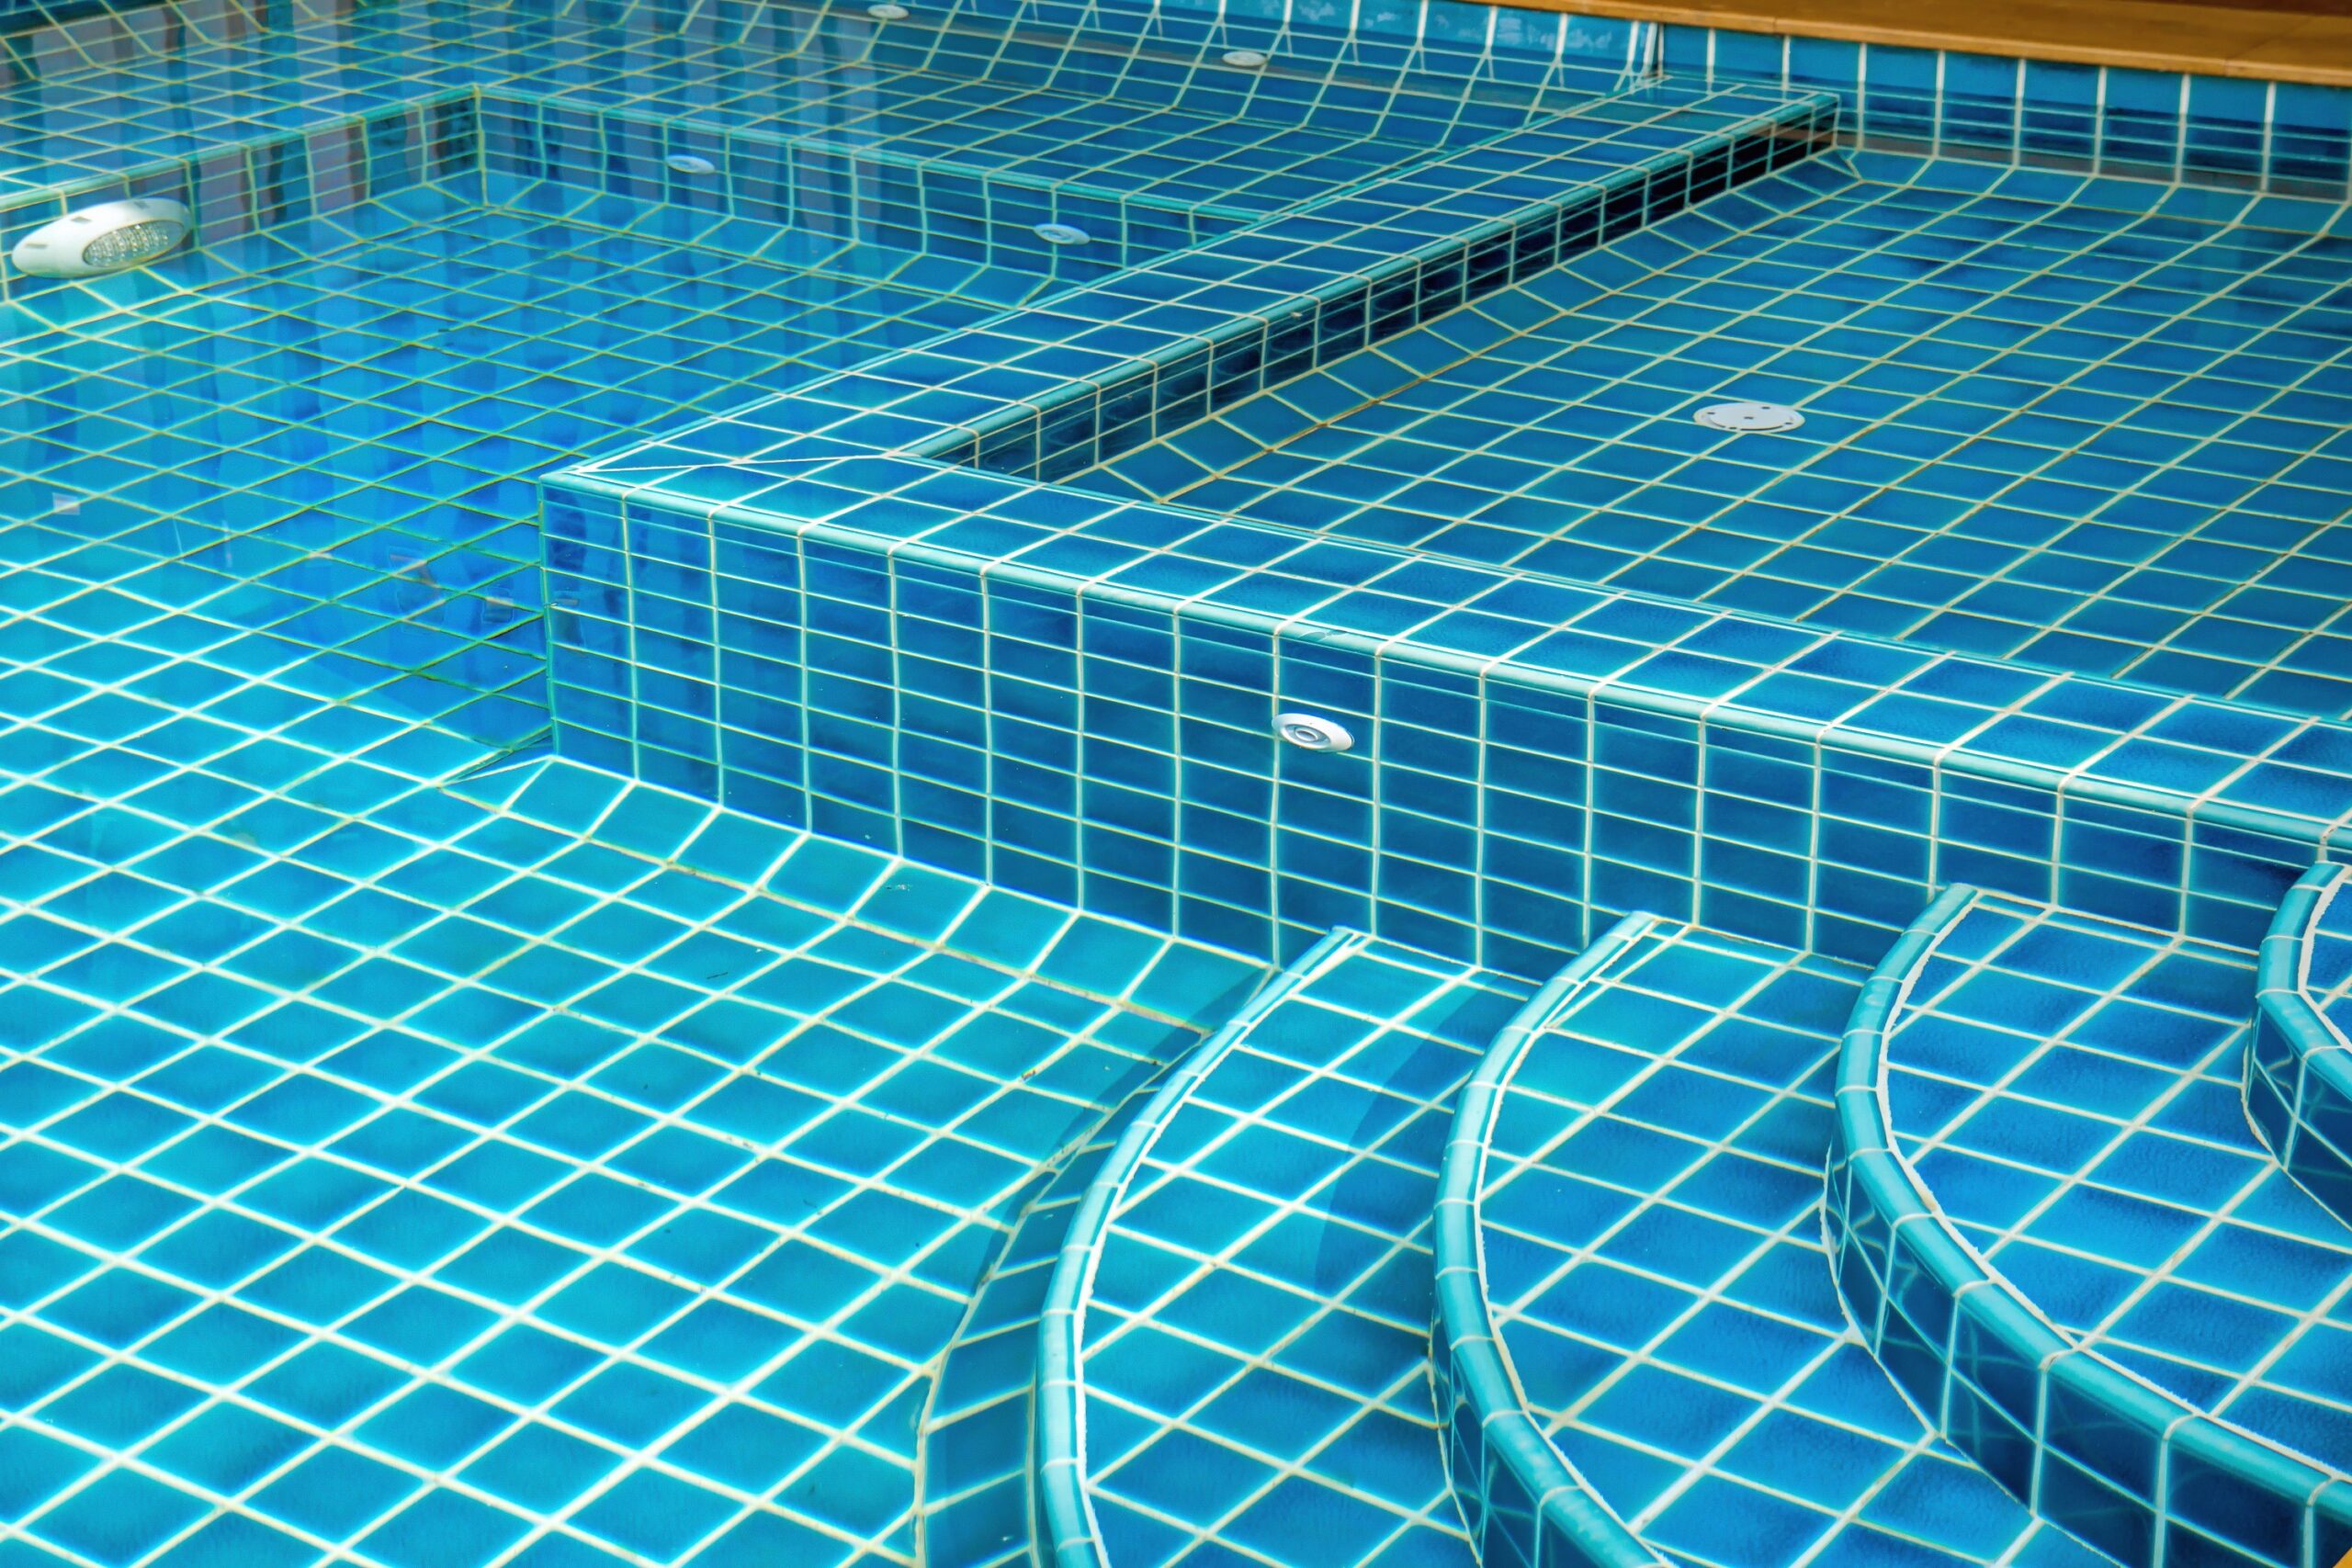 Why Choose Tiles for Your Pool Avid Tiling scaled